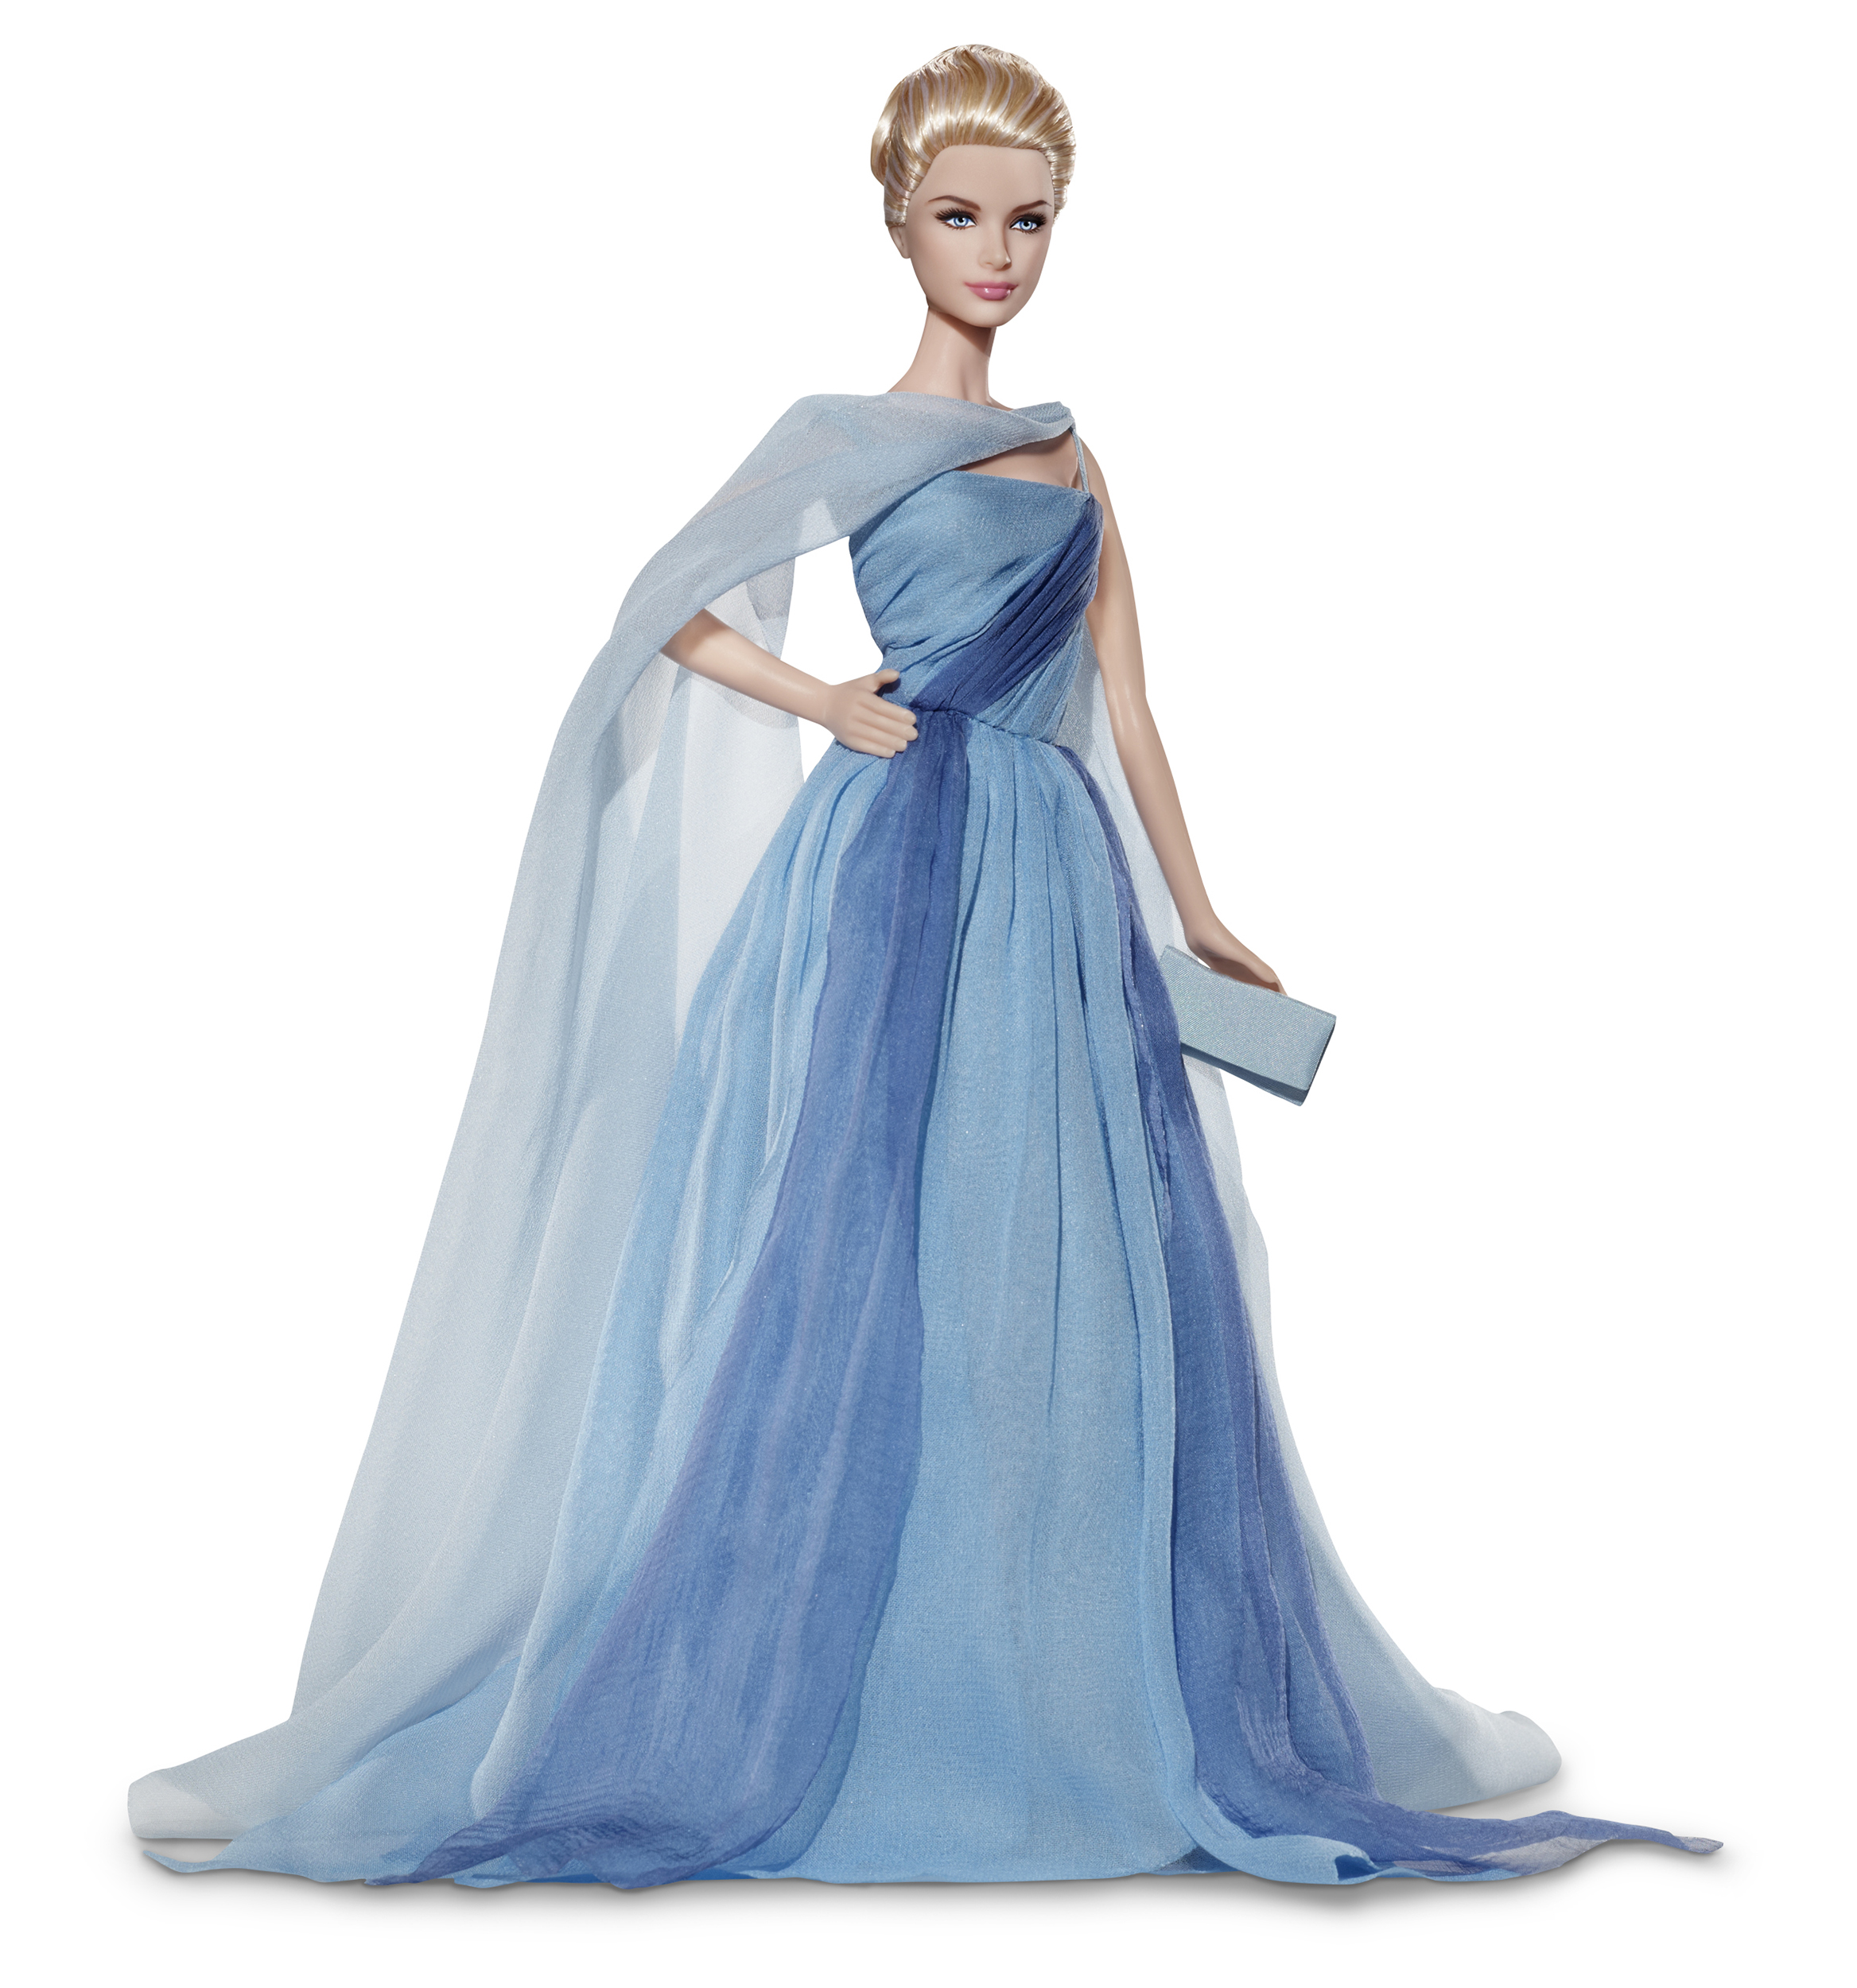 The Grace Kelly "To Catch A Thief" Barbie, released in 2011.